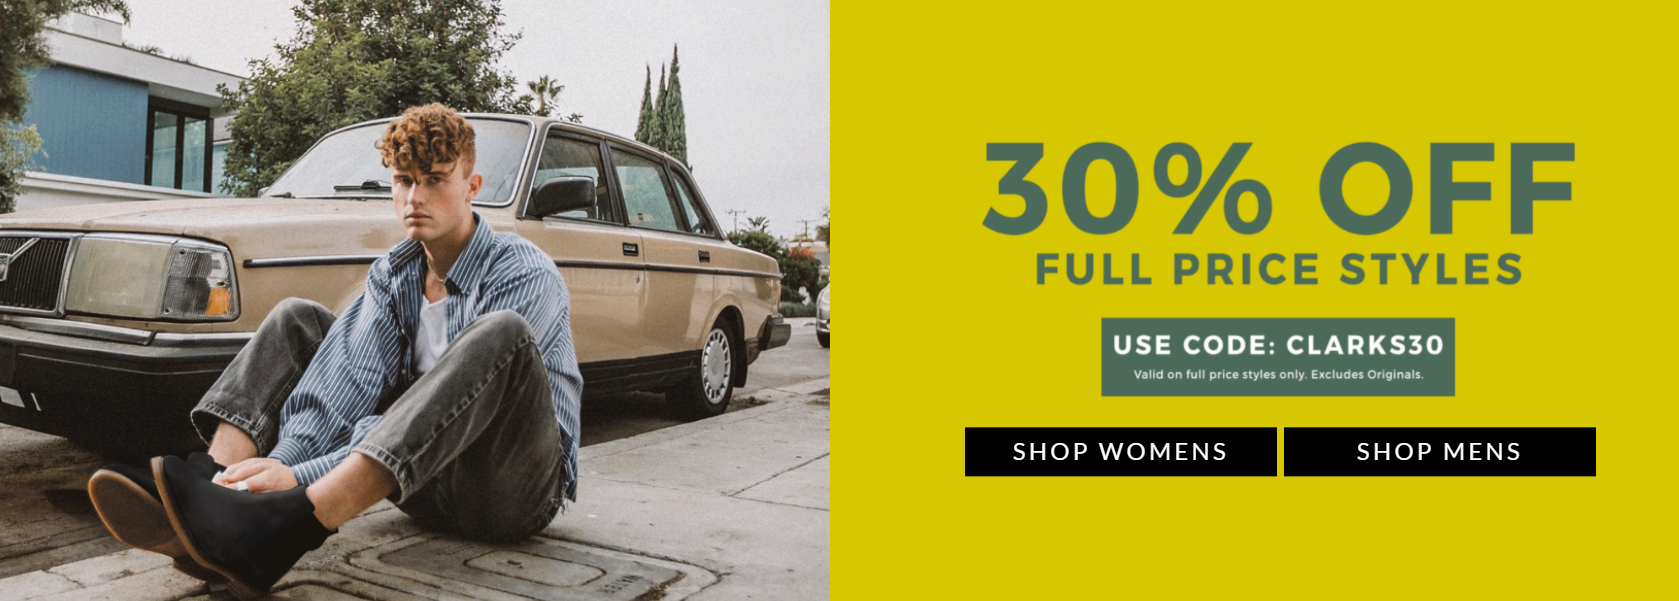 Take 30% OFF on full priced styles